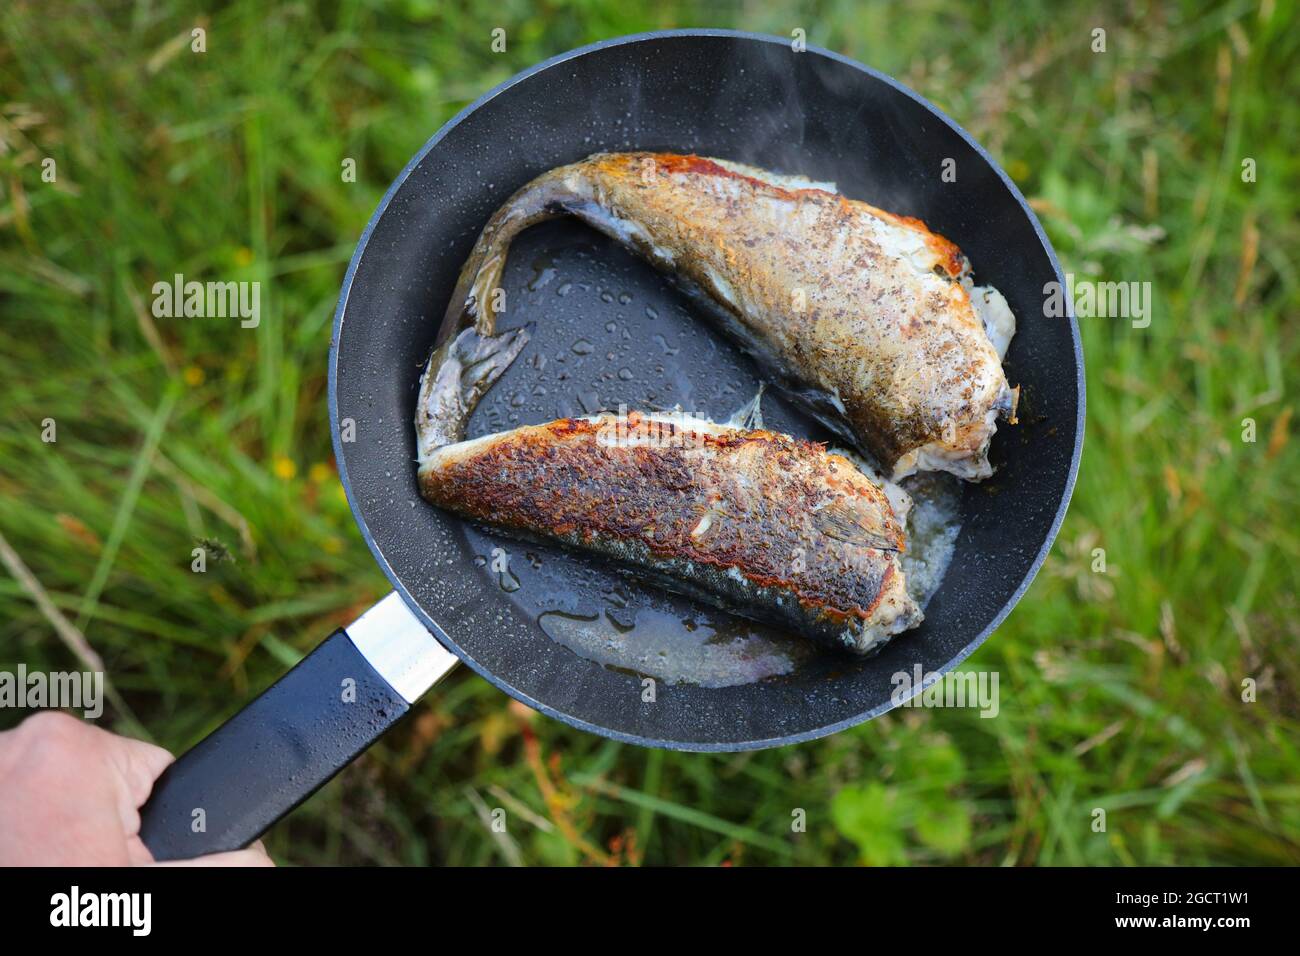 Fish in a frying pan over an outdoor fire Stock Photo - Alamy